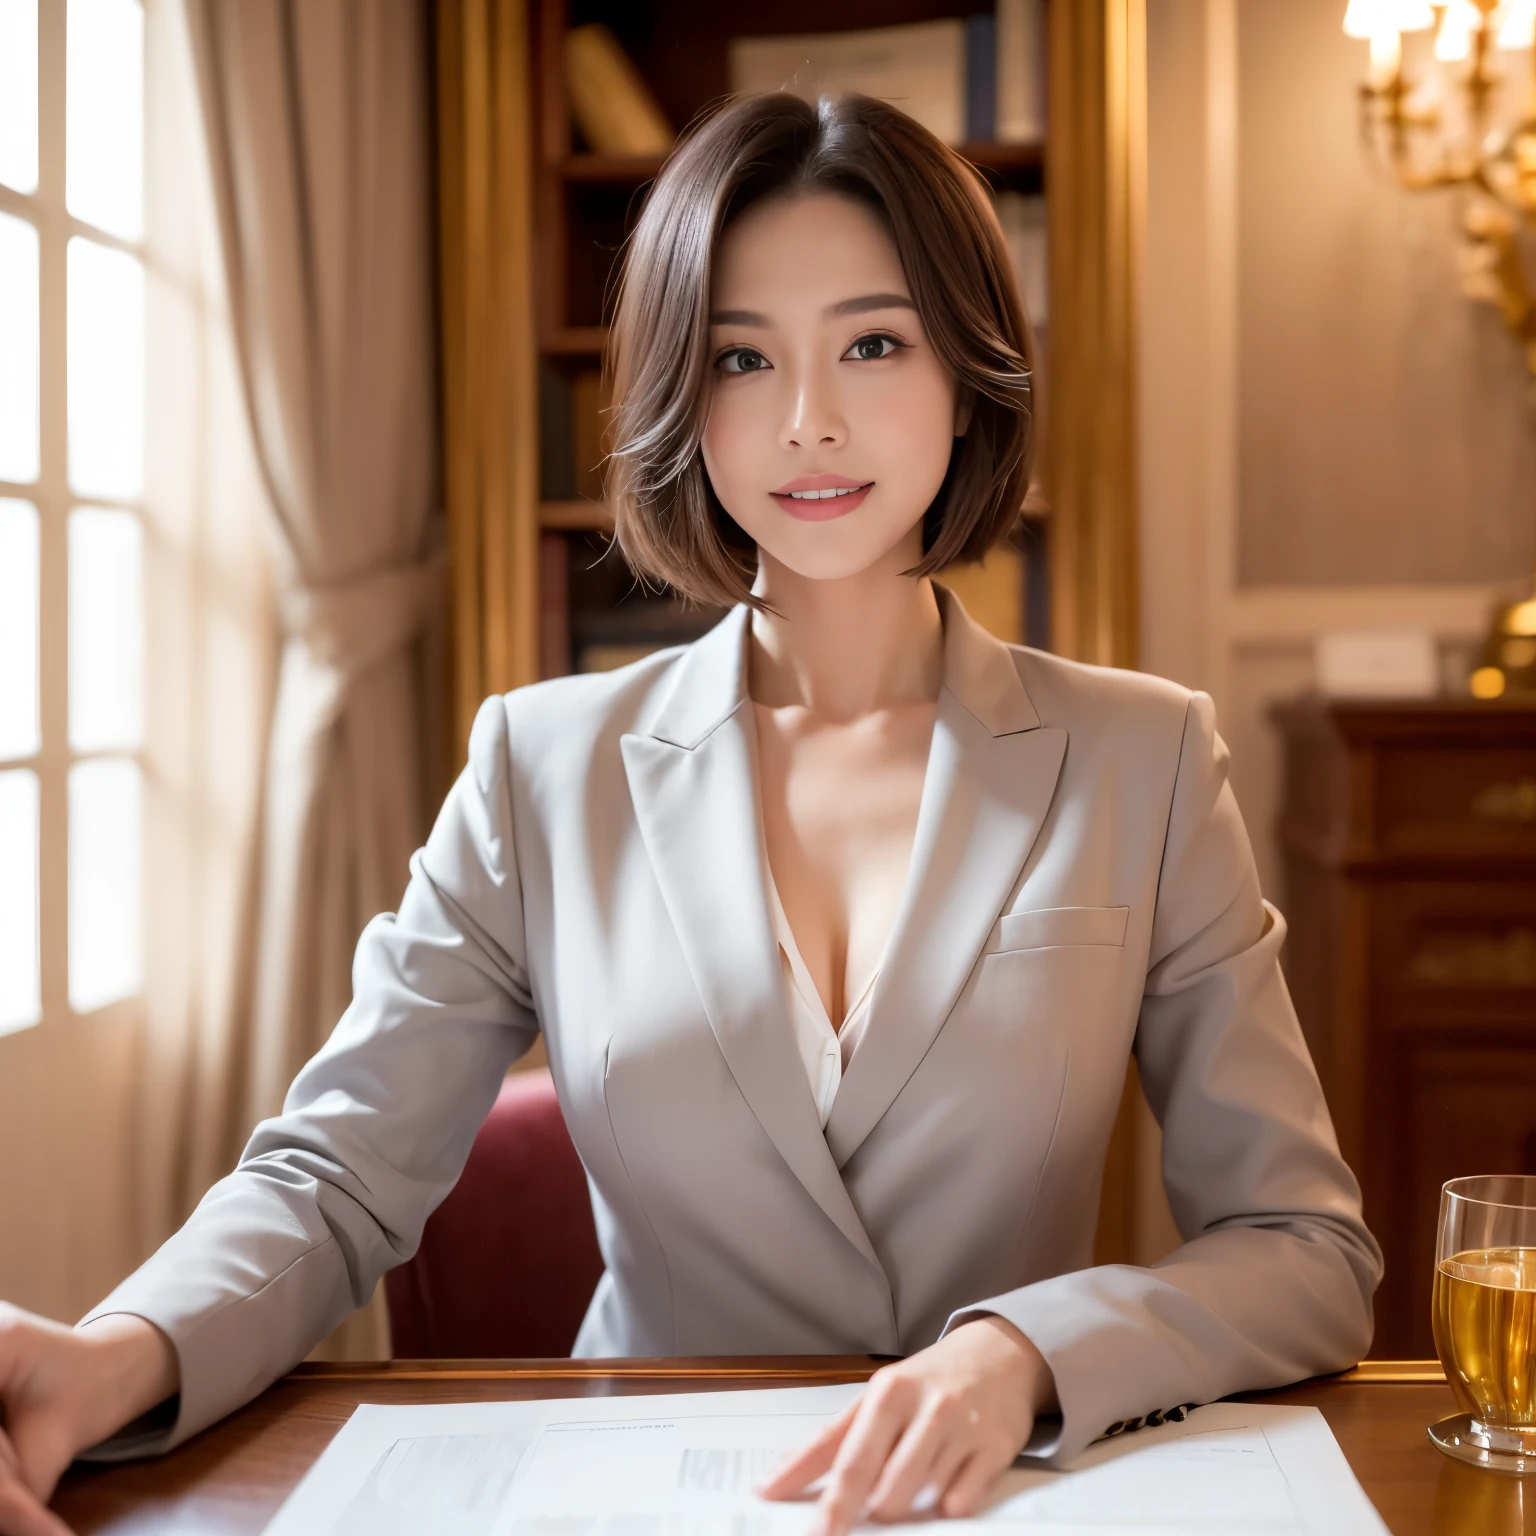 ((highest quality、Tabletop、8K、Best image quality))、((One mature woman、She holds the most luxurious CEO position&#39;office、Standing Elegantly、Secretary with elegant posture))、(photograph 1 枚:1.5)、(woman&#39;photograph&#39;Upper Body:1.5)、(Woman Cowboy Shot:1.5)、Hair Bun、(Grey suit、White Formal Blouse)、(The most luxurious and luxurious royal VIP room、bright lighting of chandelier、The most luxurious and luxurious desk、The most luxurious and luxurious glass showcase、the most luxurious and luxurious chair、the most luxurious and luxurious carpet、The most luxurious and luxurious bookshelf、the most luxurious and luxurious curtains)、Perfect Anatomy、Beautiful Teeth、sad smile、Detailed face、(D cup breasts）、（Standard body type）、（Short black hair:1.4）